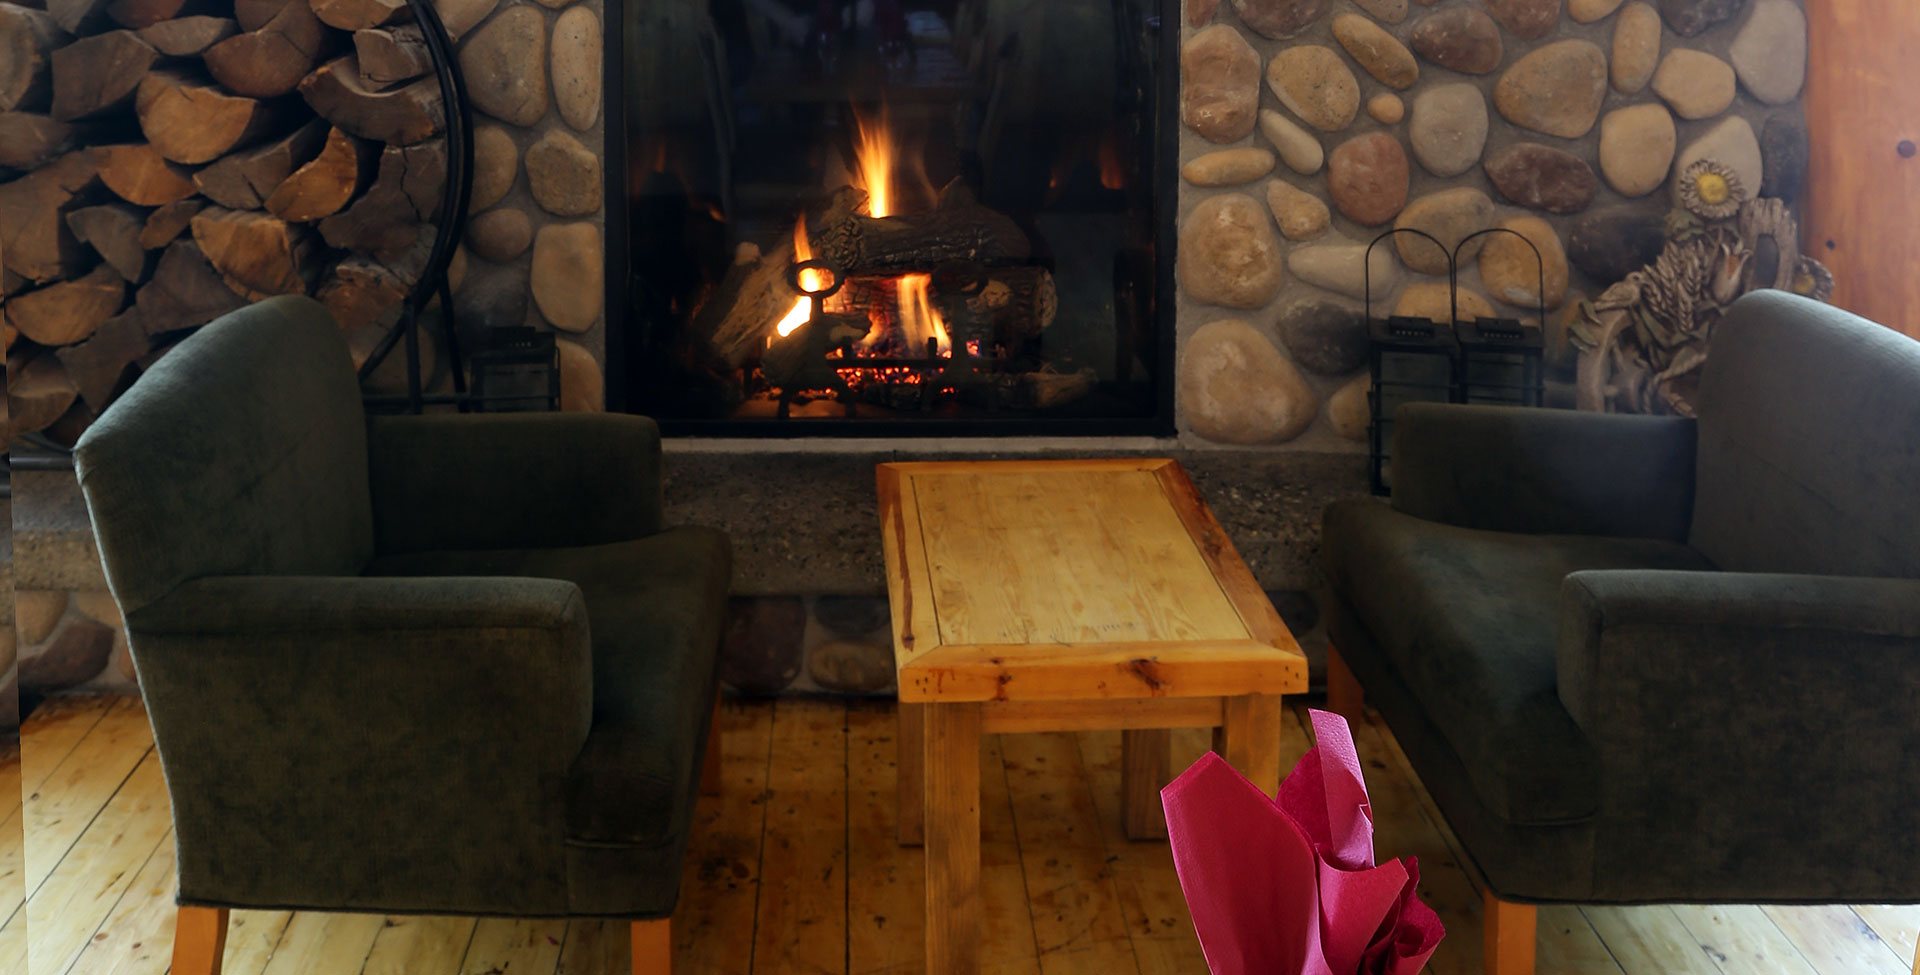 At the Stanford Fernie Resort, two charcoal colored arm chairs sit between a rustic square coffee table that are part of the lounging area with a stone woodburning fireplace.